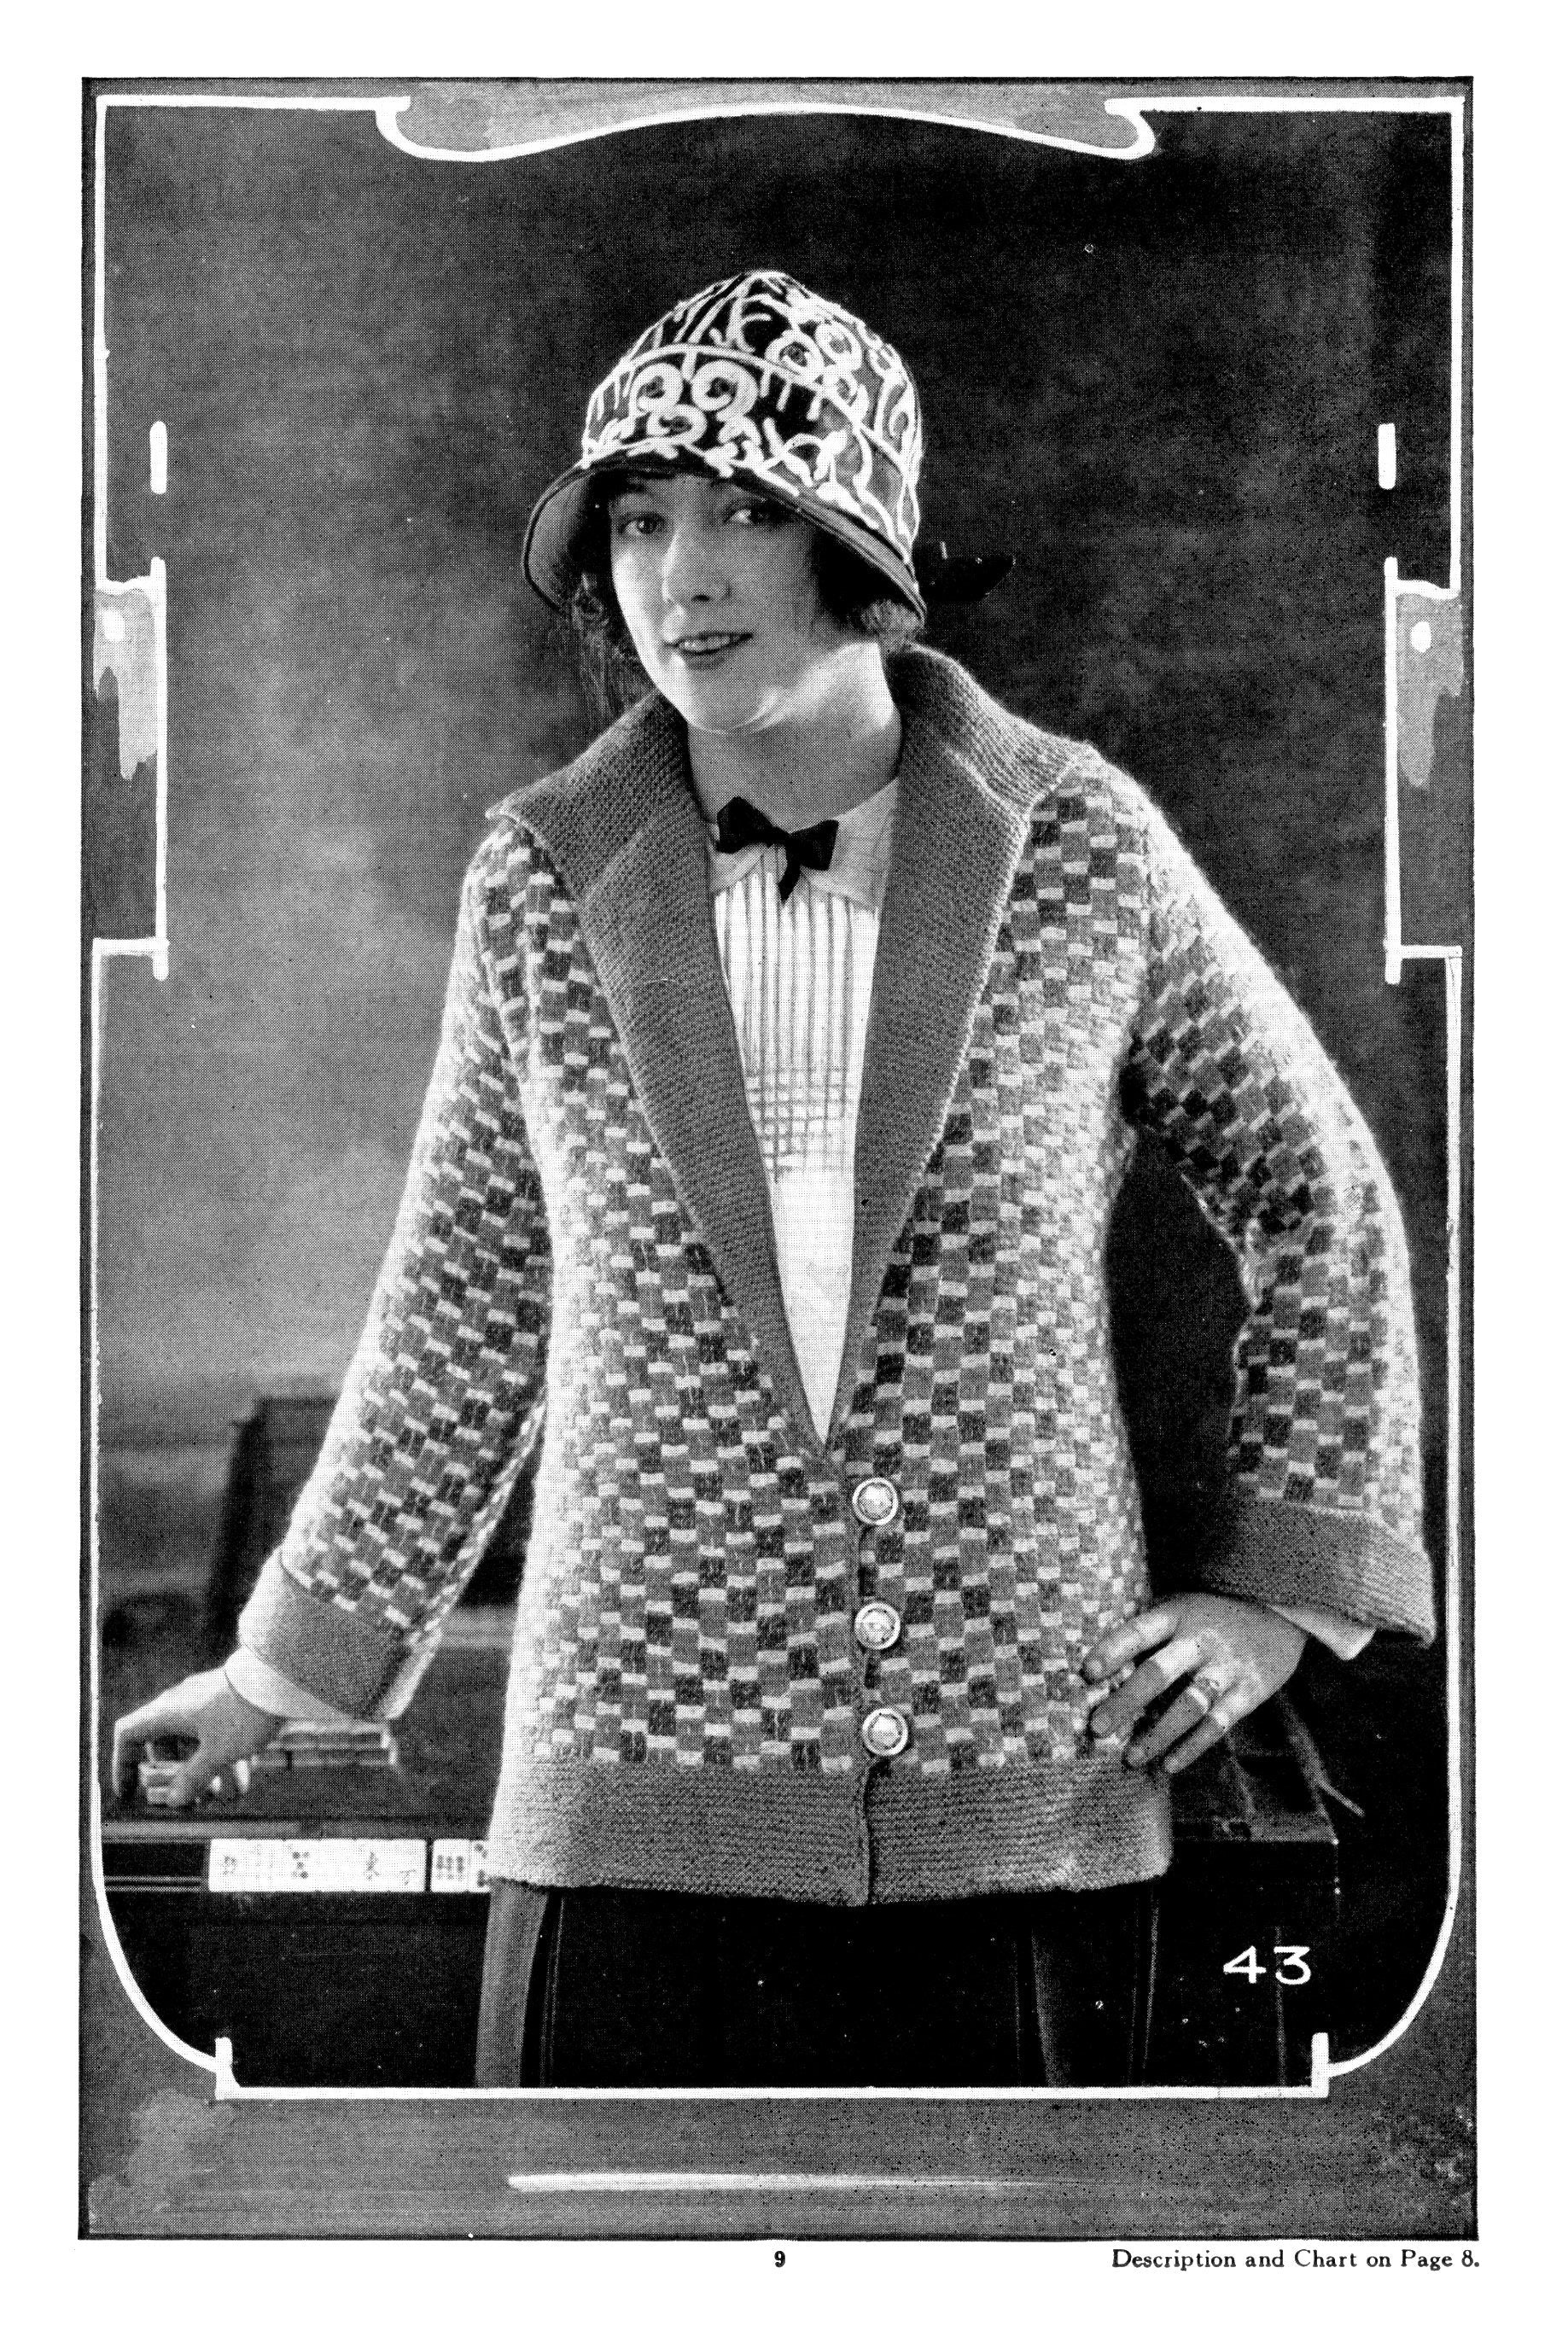 The Online Knitting Reference Library: Download 300 Knitting Books  Published From 1849 to 2012